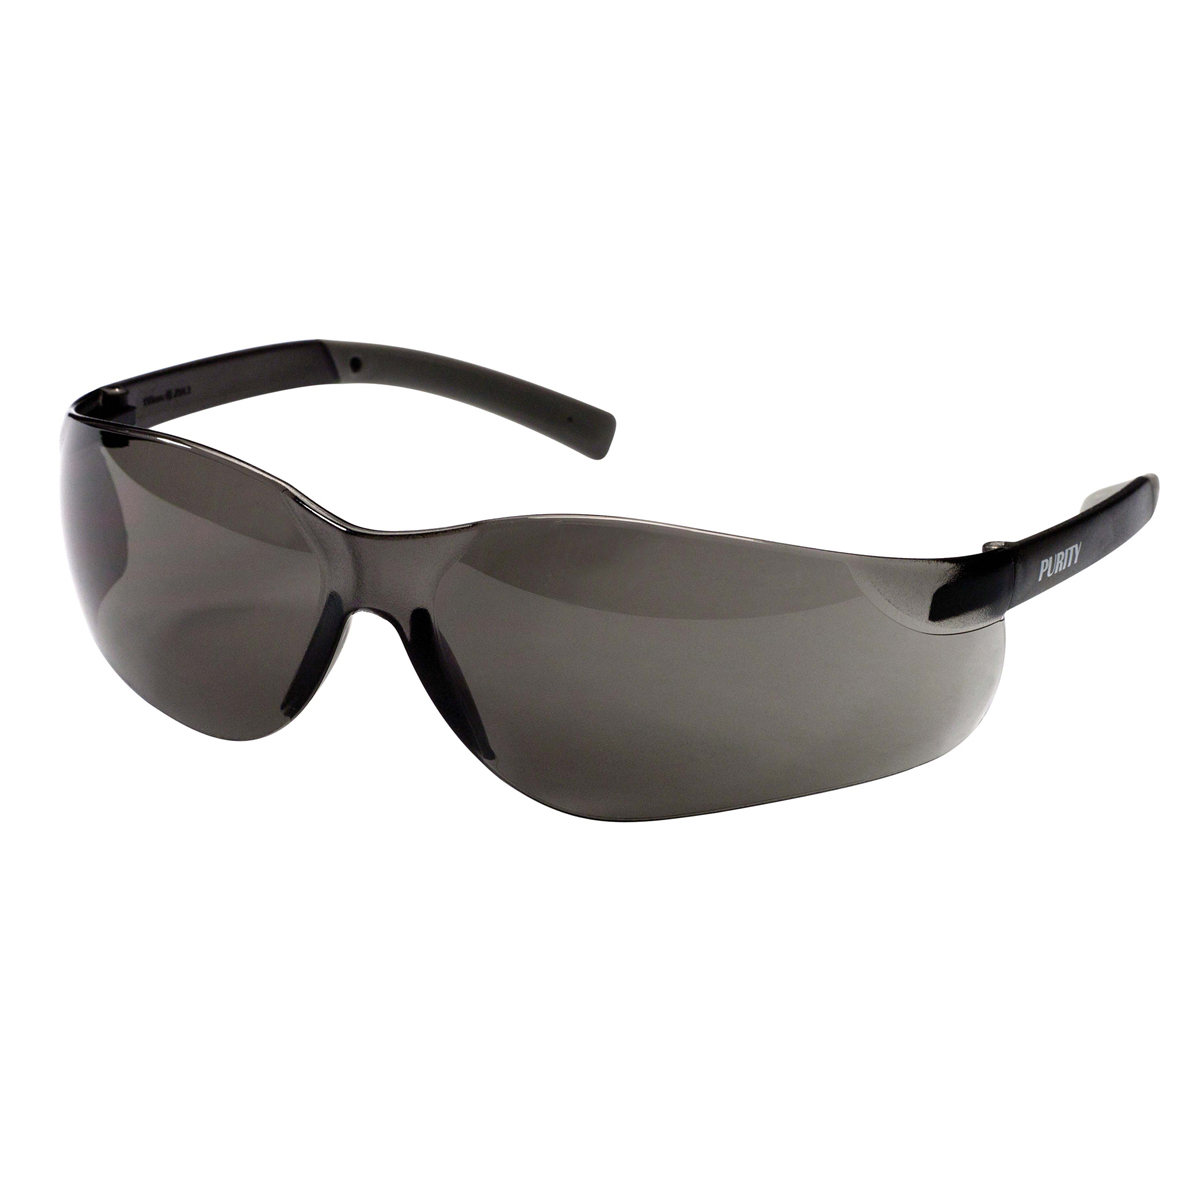 Kimberly-Clark Professional* KleenGuard™ Purity* Gray Safety Glasses With Smoke Hard Coat Lens (Availability restrictions apply.